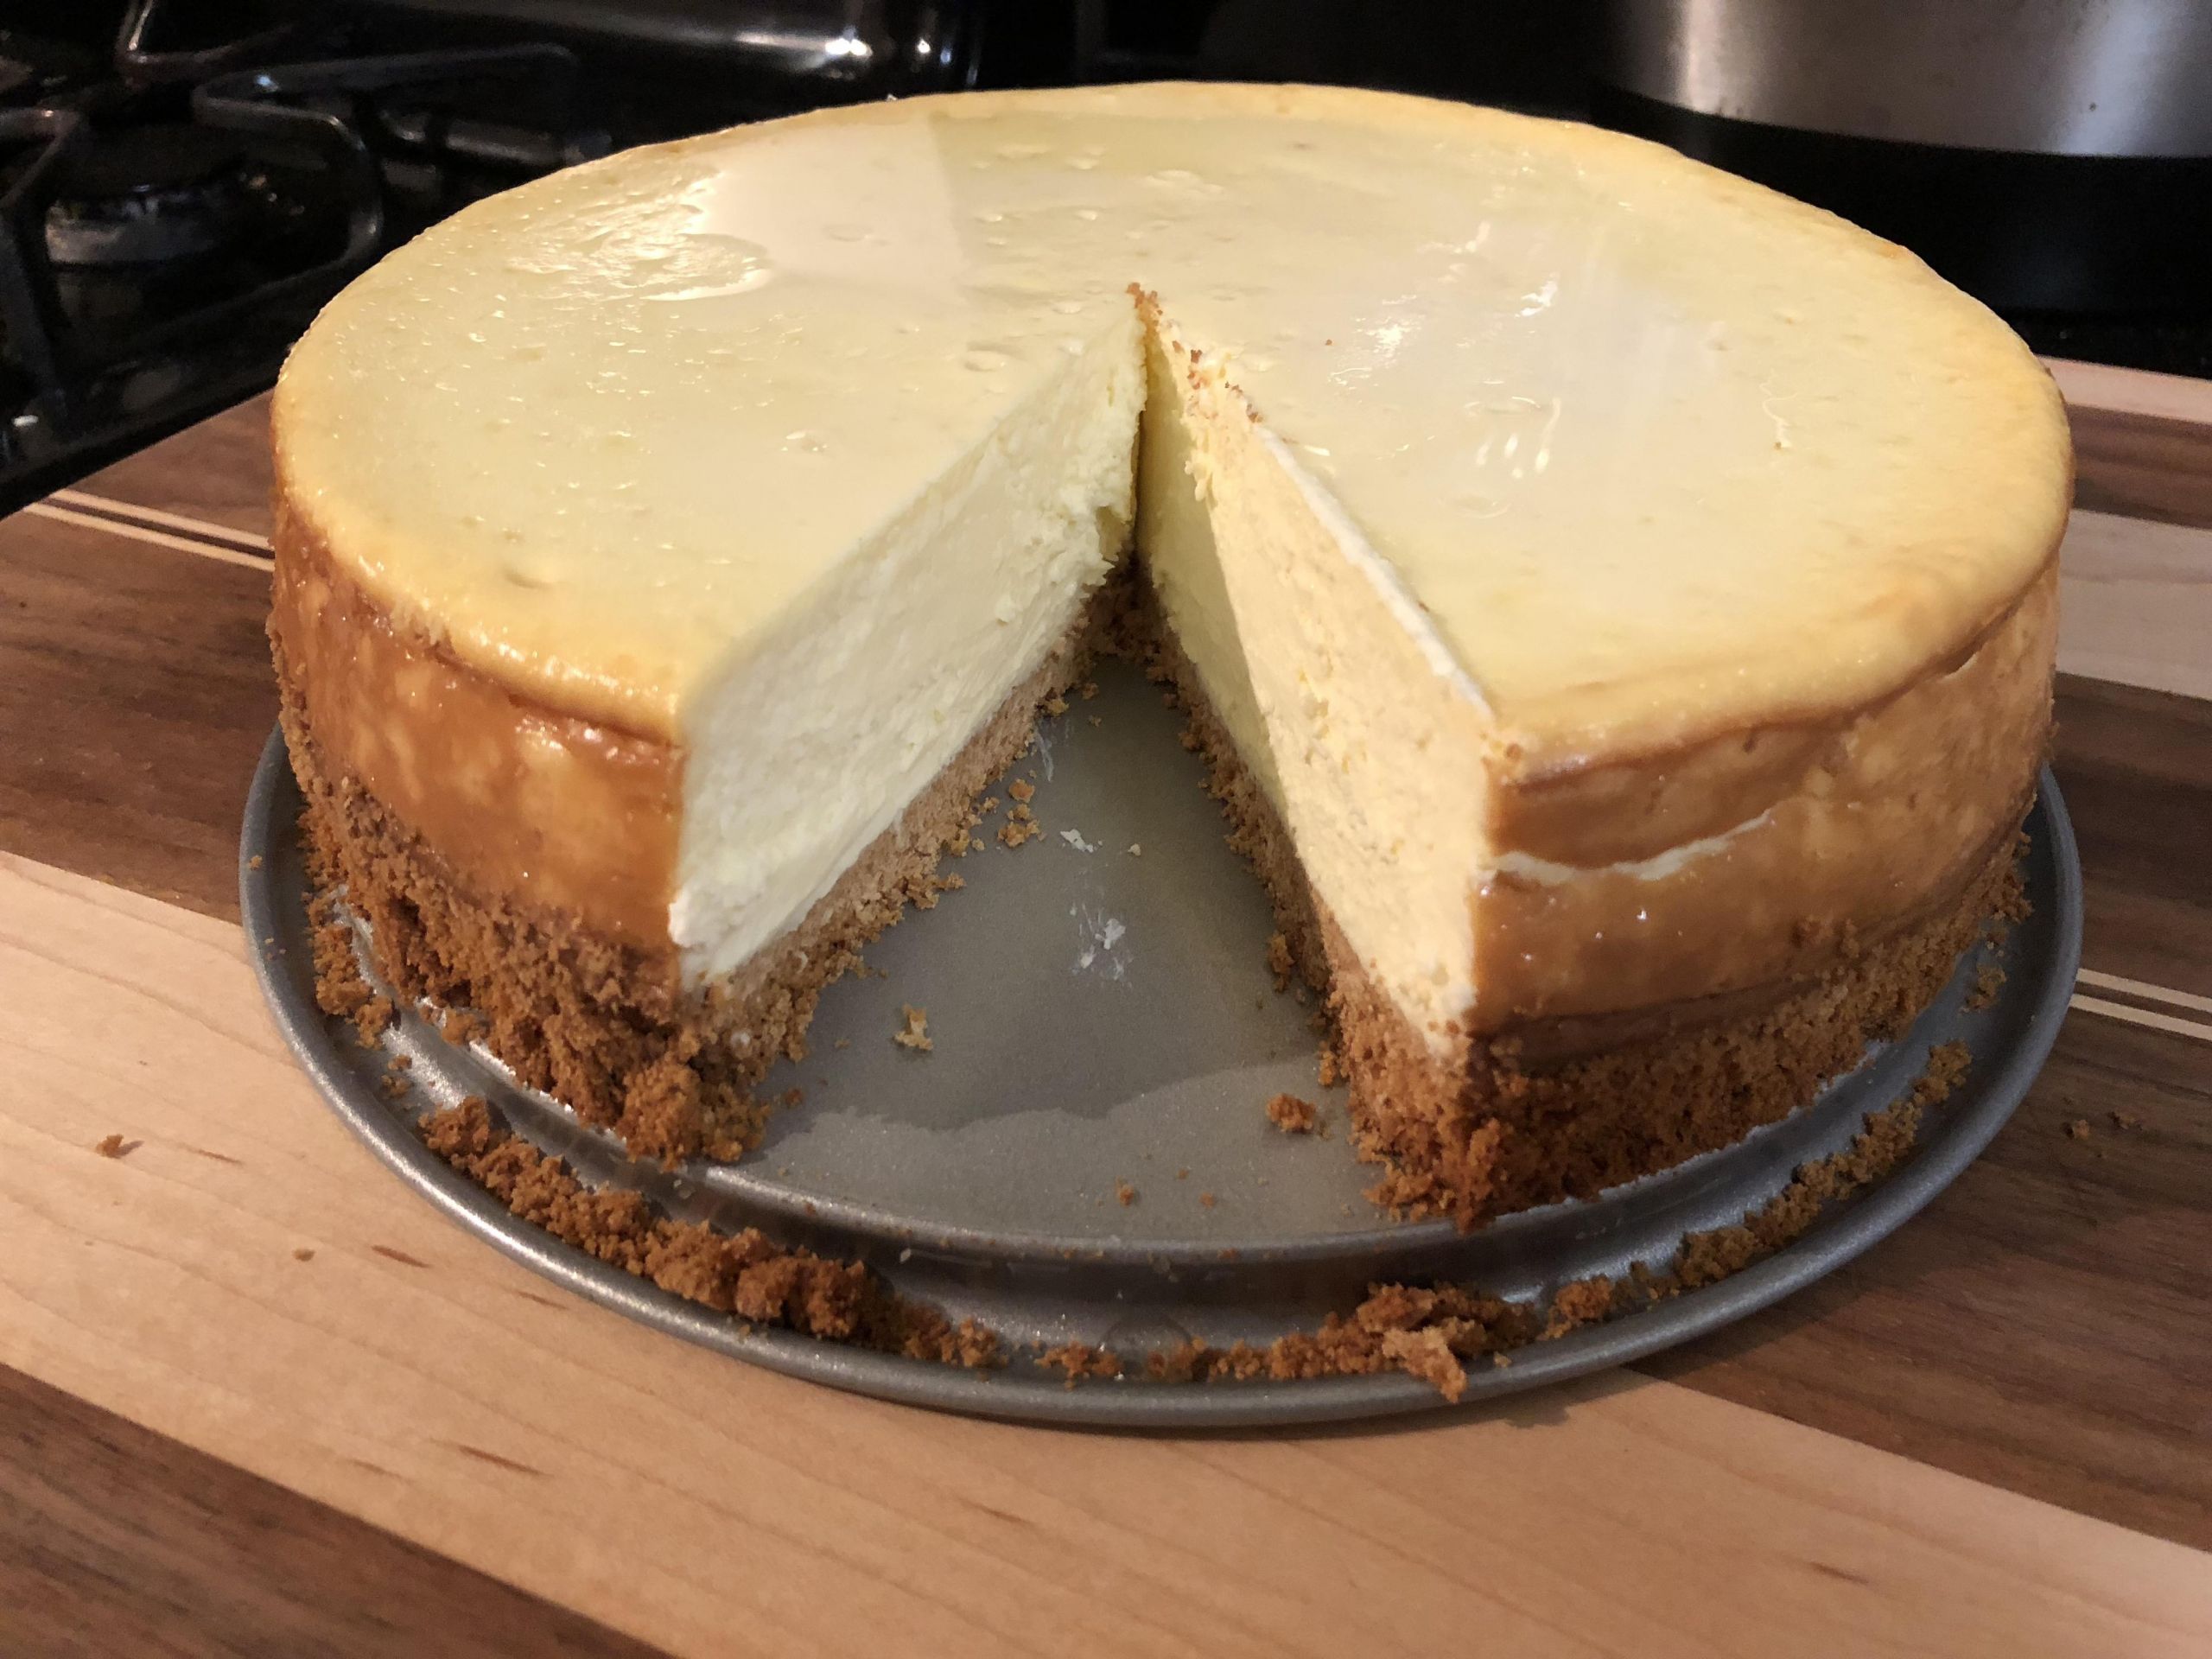 Home Made Cheese Cake
 [Homemade] Cheesecake turned out great other than loose